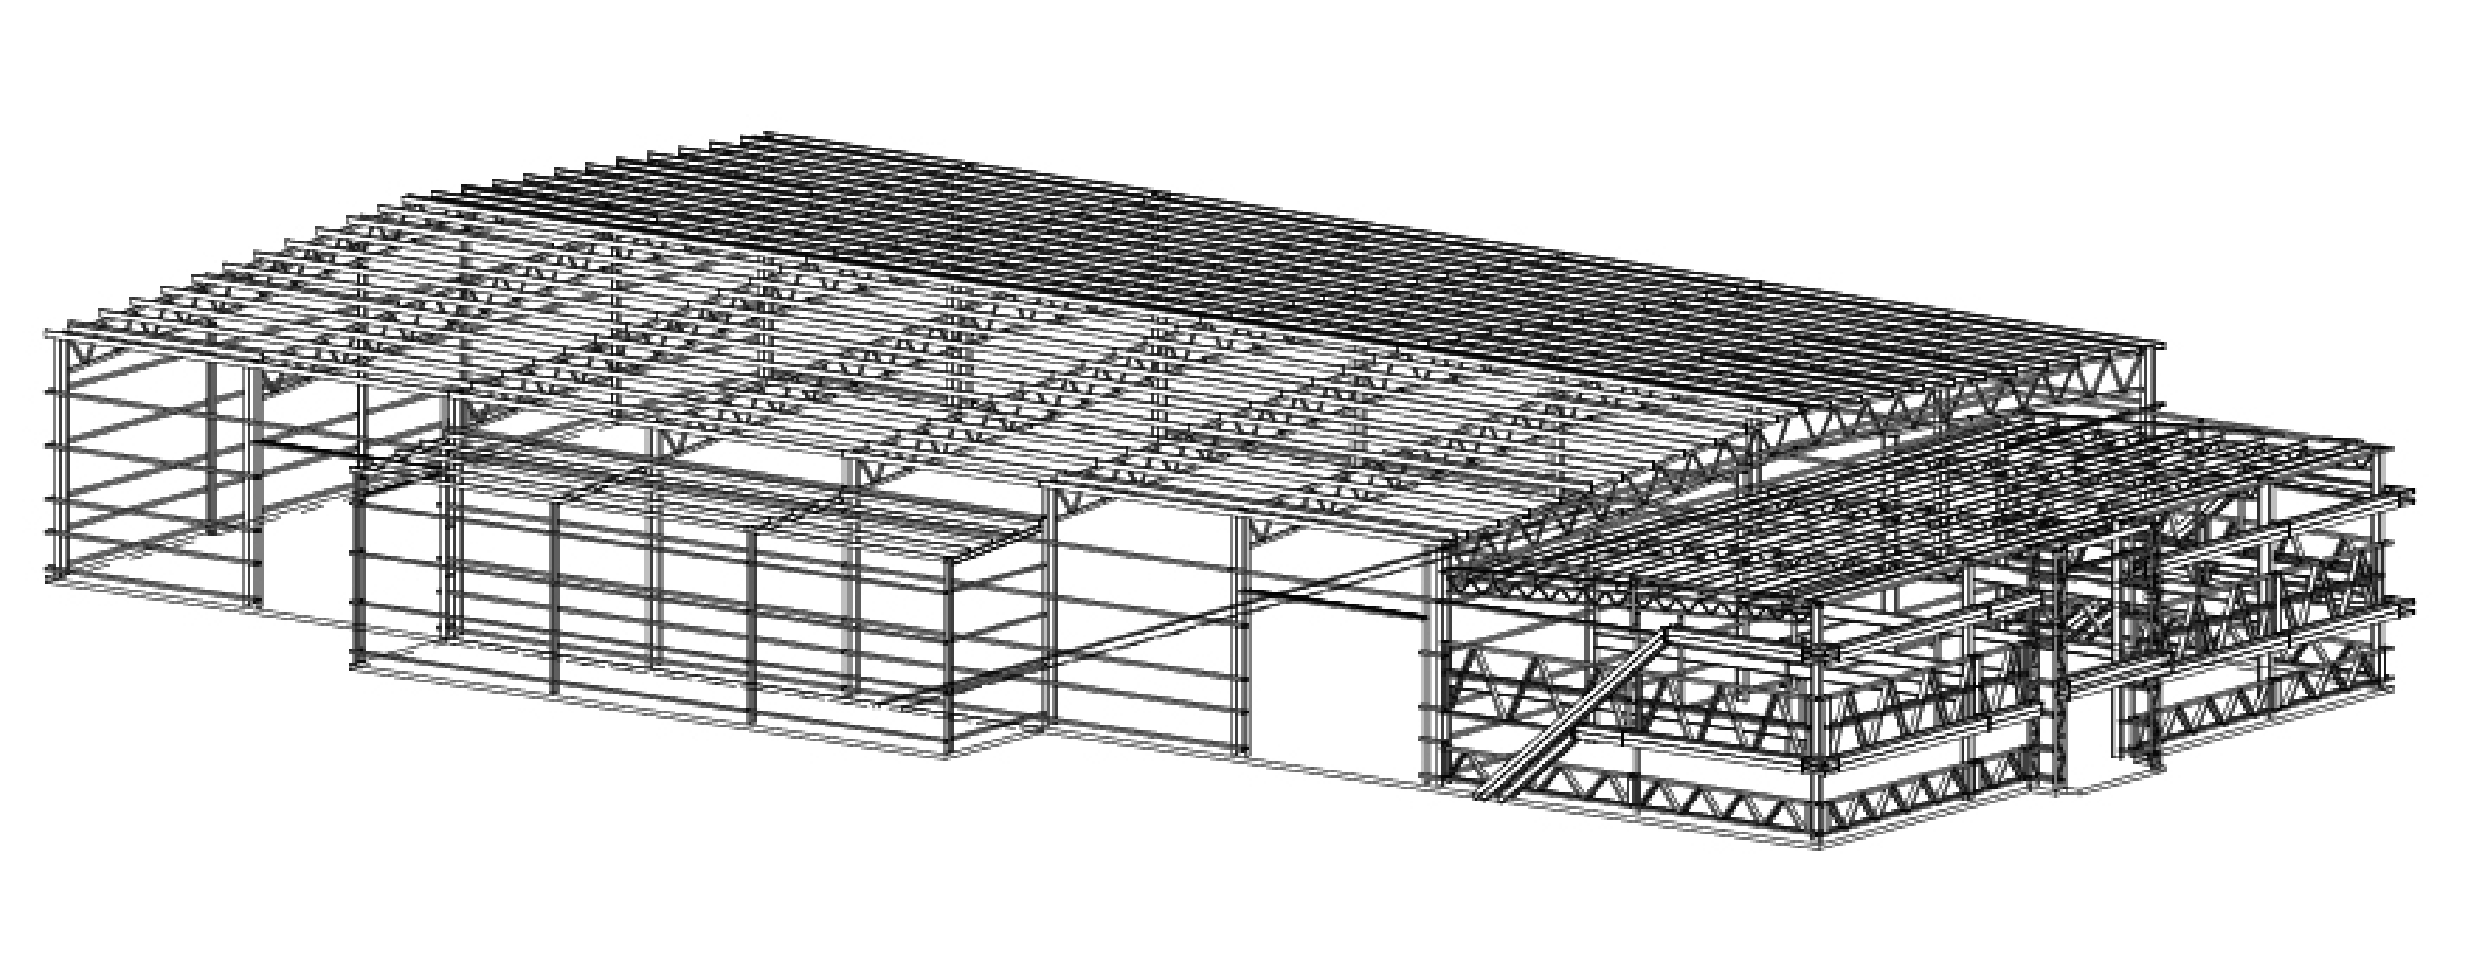 Inbox Group commercial shed drawing